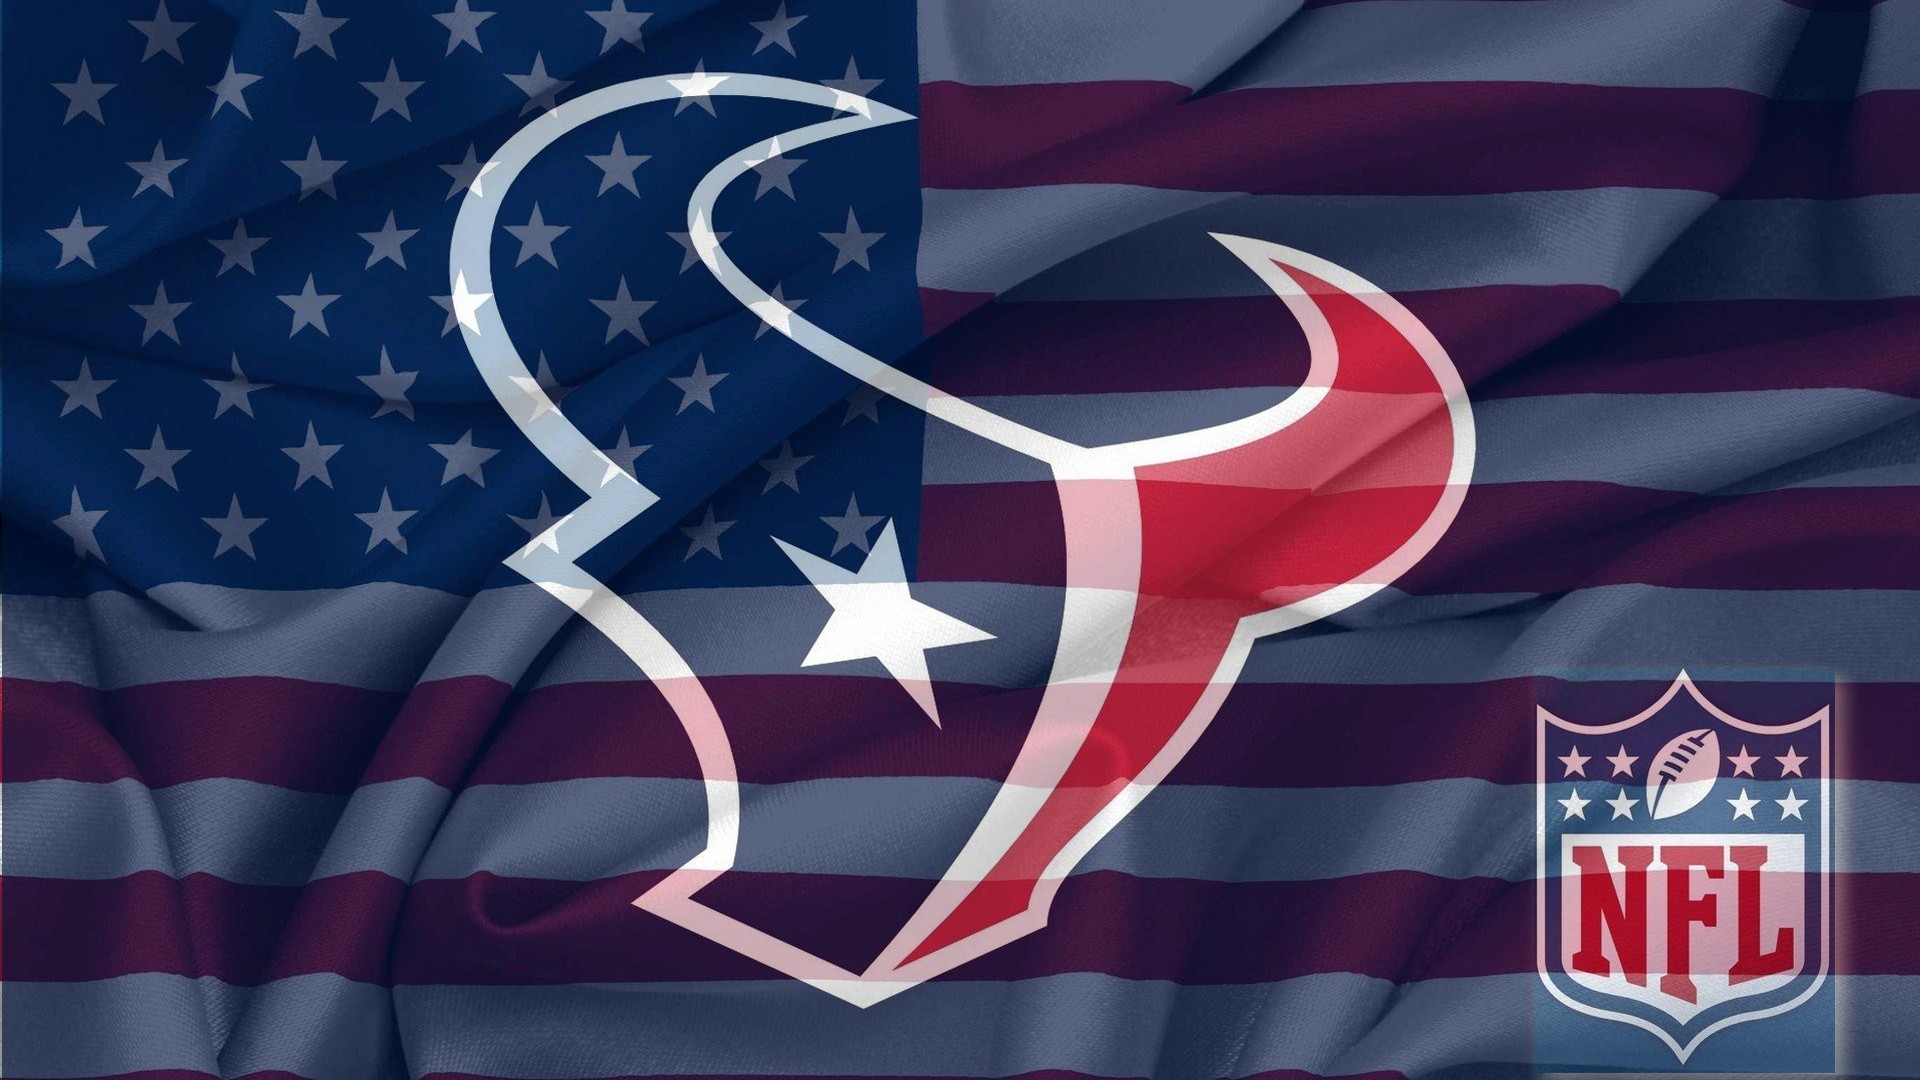 Houston Texans Wallpaper For Mac Backgrounds With Resolution 1920X1080